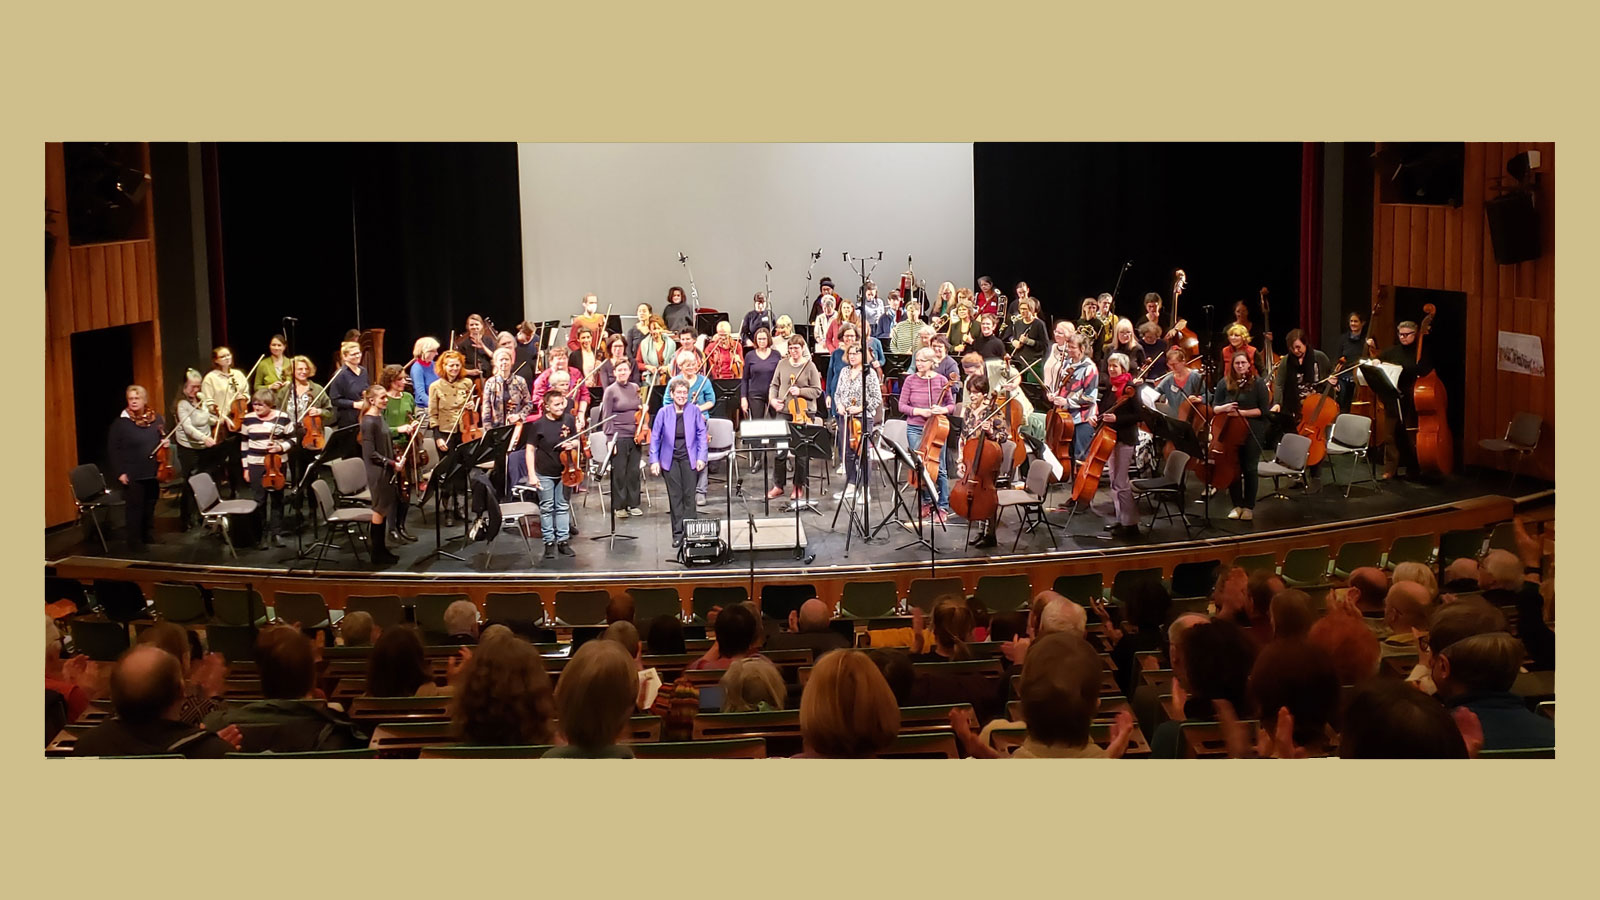 The Women’s Orchestra Project of Berlin